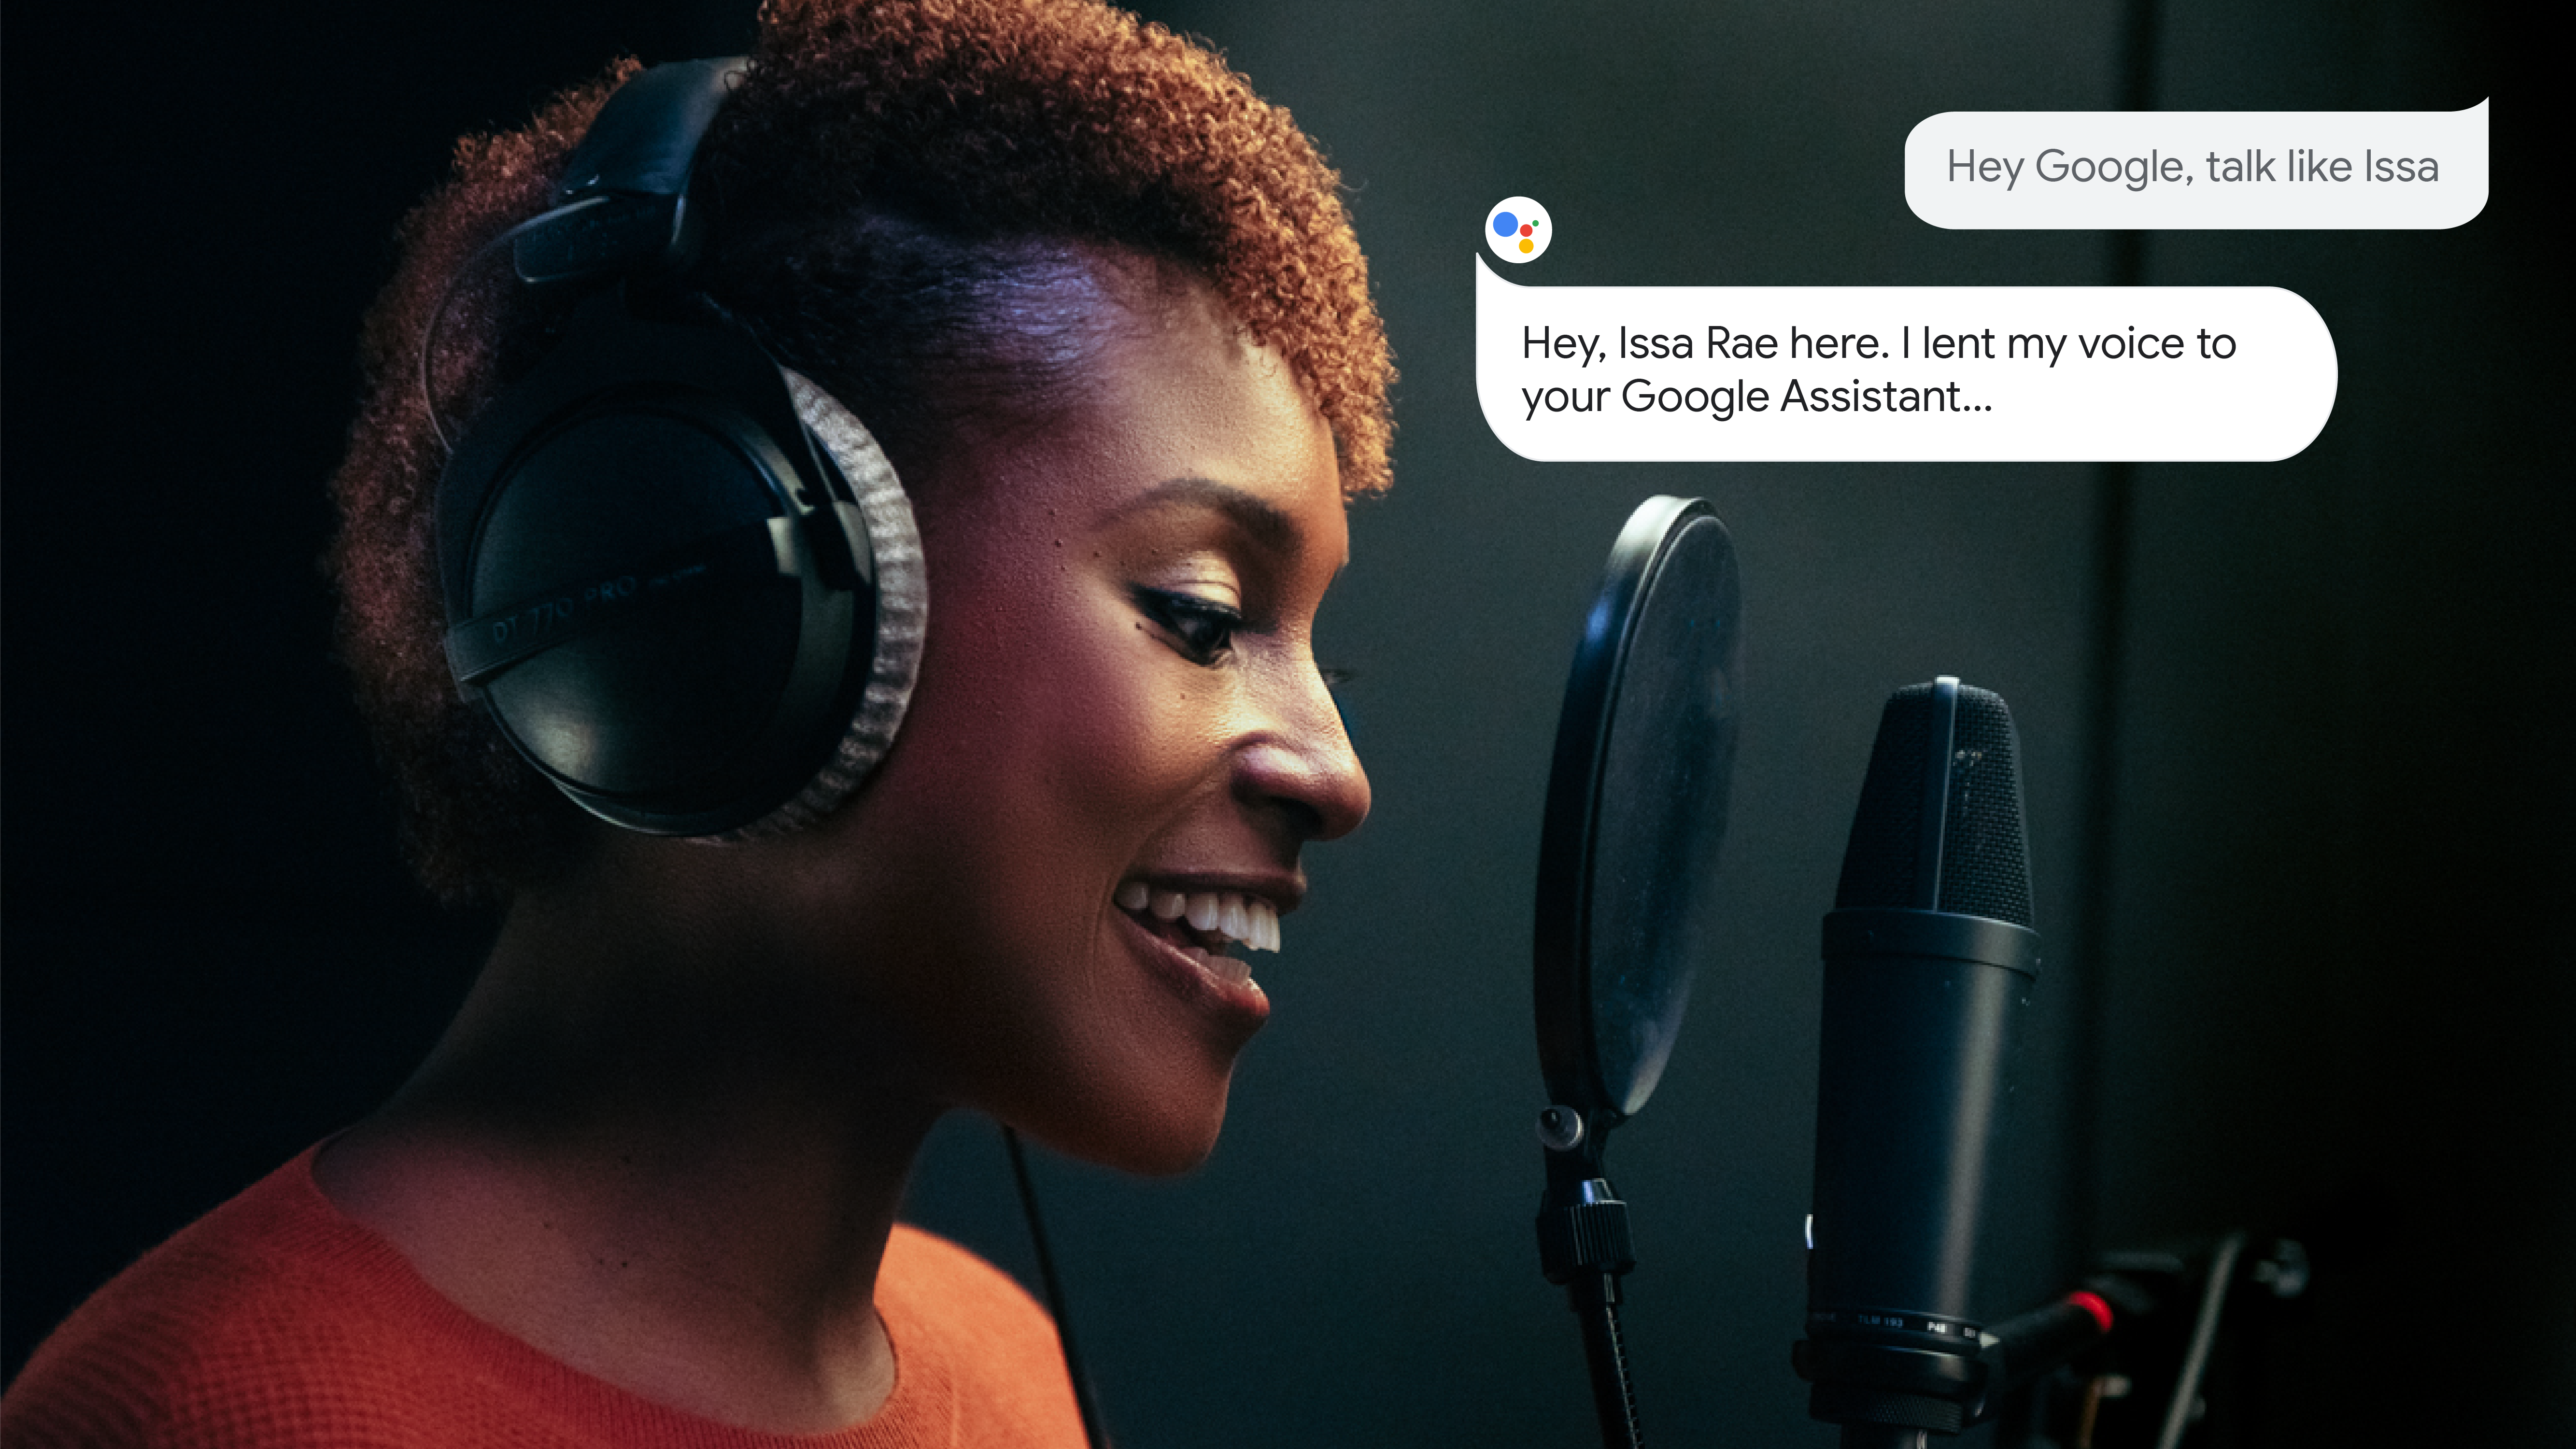 Issa Rae’s Partnership With Google Assistant Makes ‘Mirror Talks’ A Reality